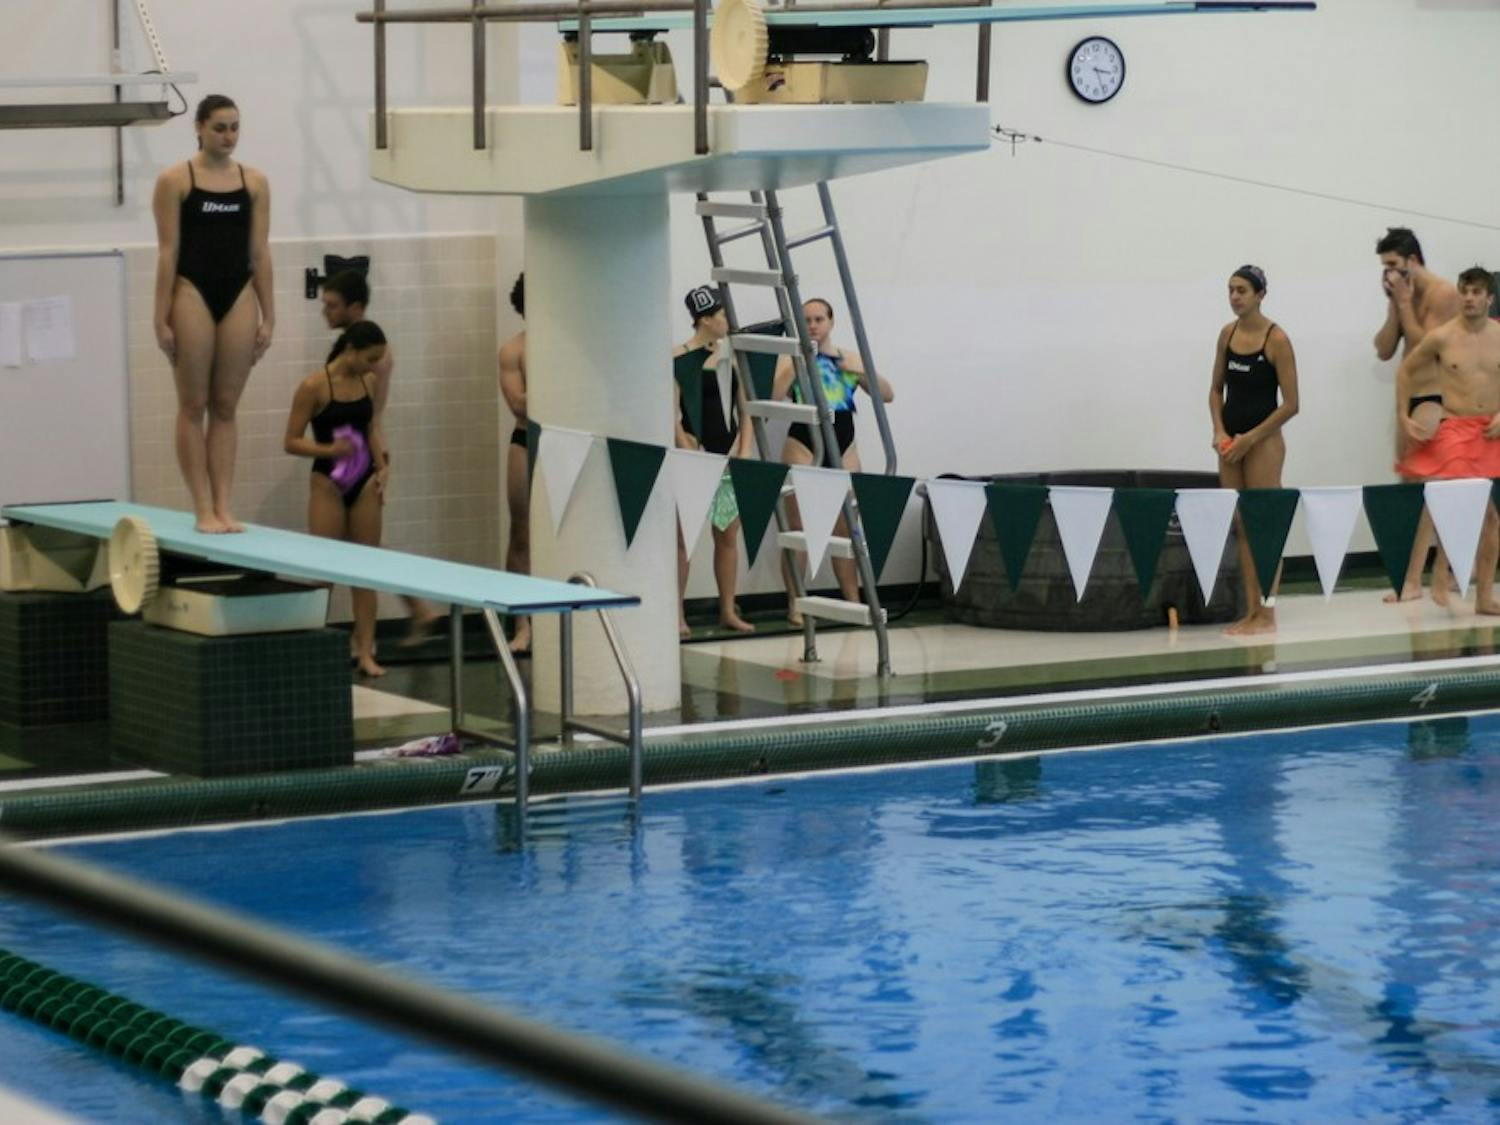 Along with the diving competition, this year’s Dartmouth Invitational also featured a strong performance by AnnClaire MacArt ’18, who broke the record for the 1,650-yard freestyle.